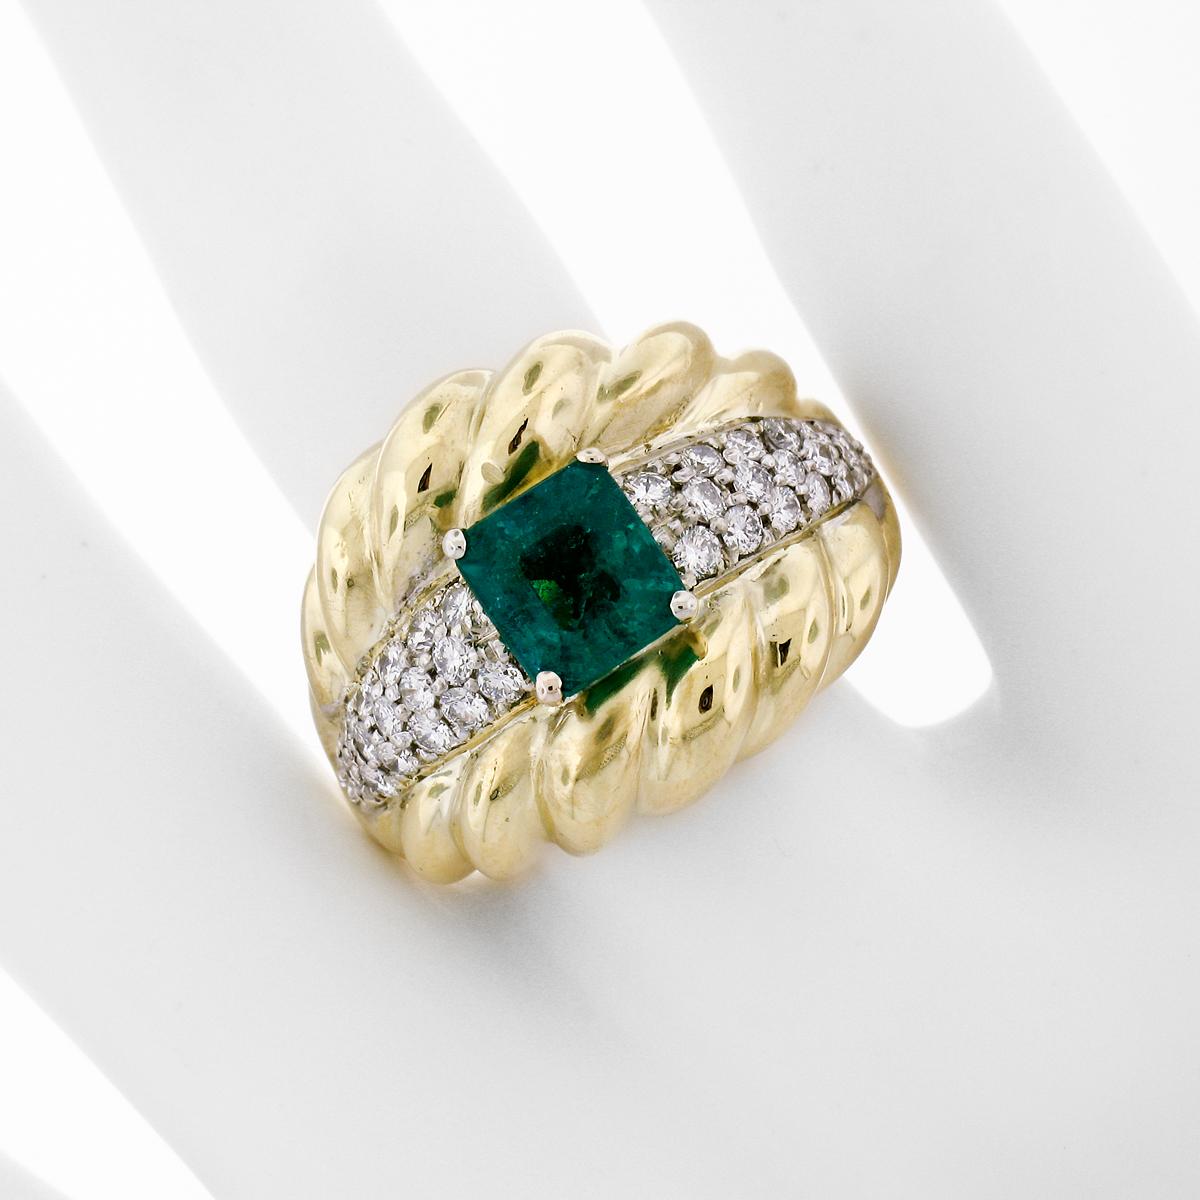 Vintage 18K TT Gold 2.29ctw GIA Colombian Emerald & Diamond Cocktail Ring In Excellent Condition For Sale In Montclair, NJ